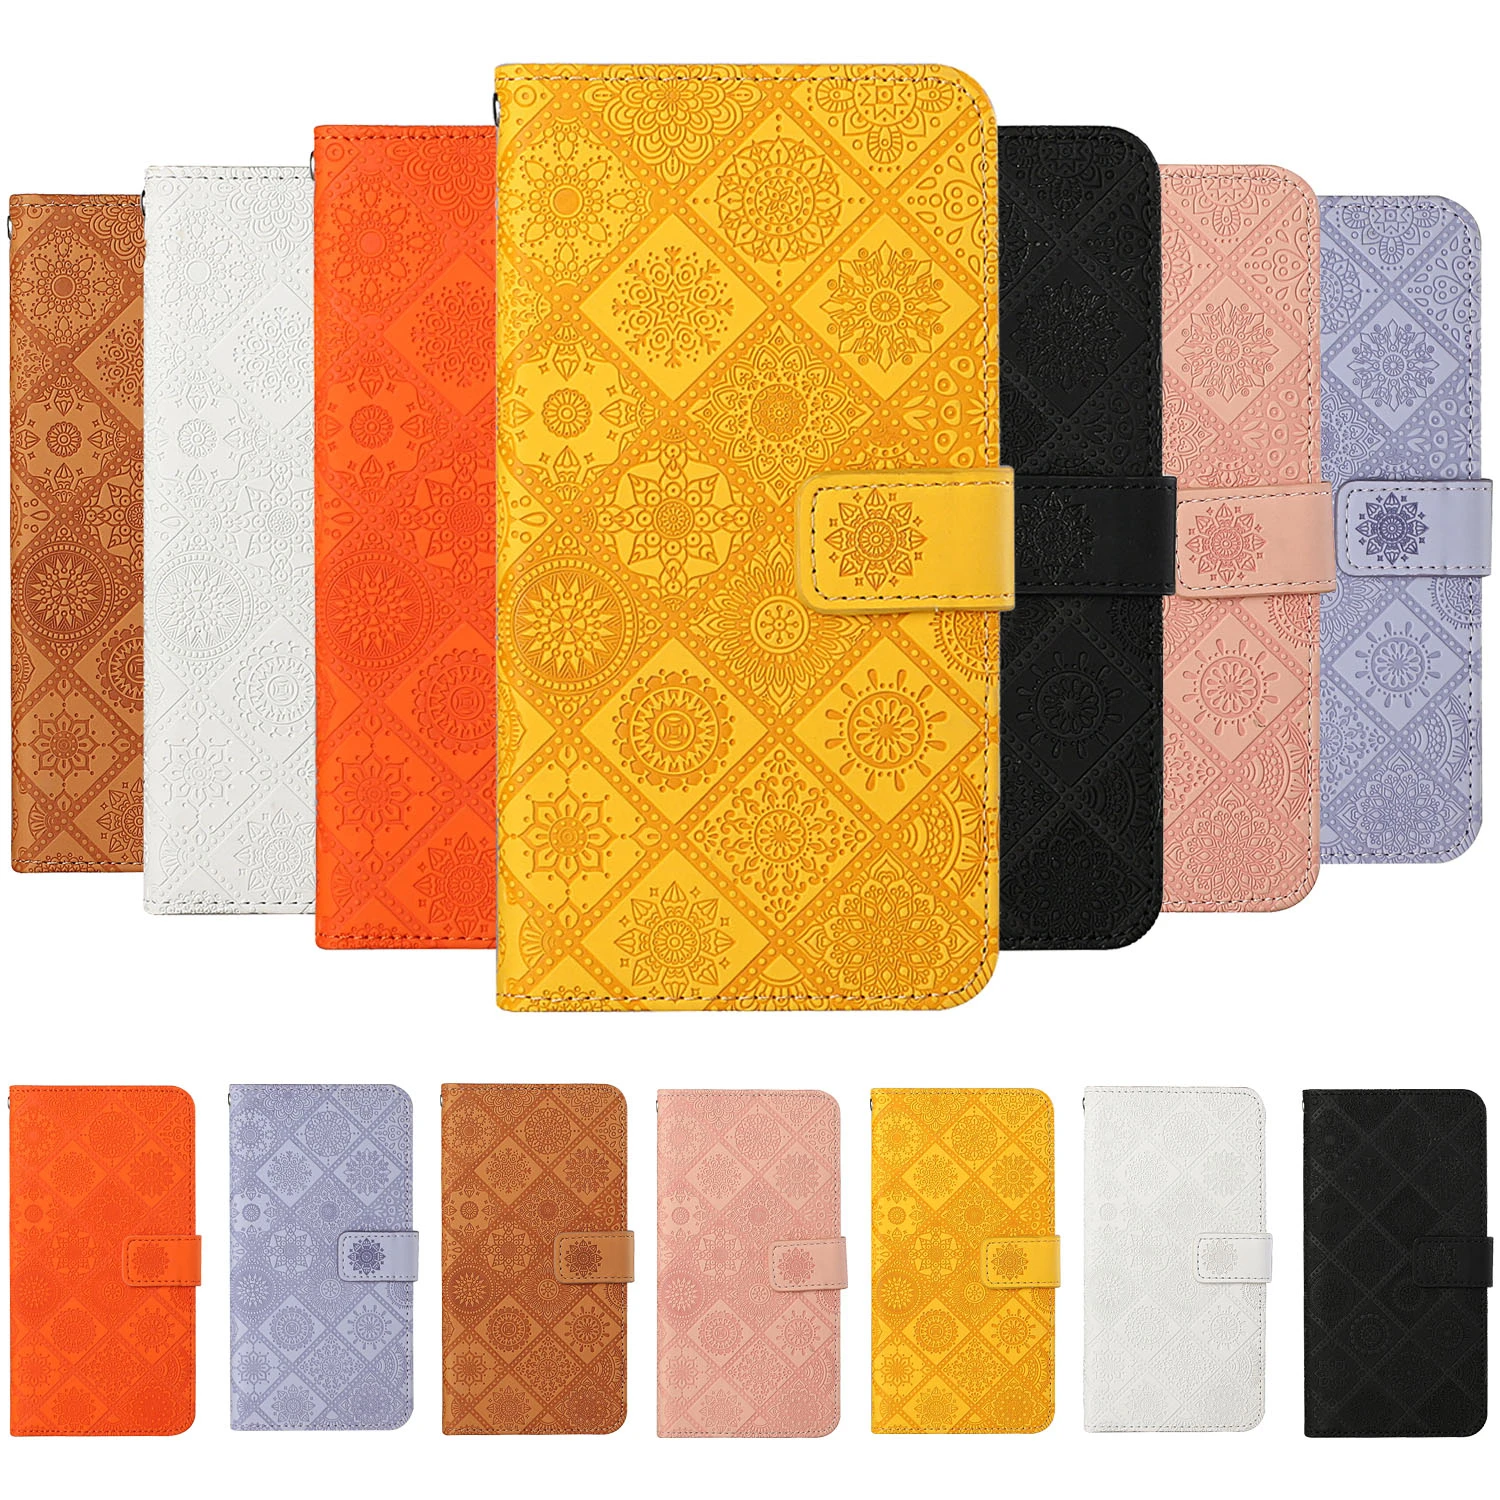 National Pattern Flip Walle Leather Case For Xiaomi Mi 10 10T Note10 Note 10 Lite Pro Coque Card Holder Stand Book Phone Cover case for xiaomi